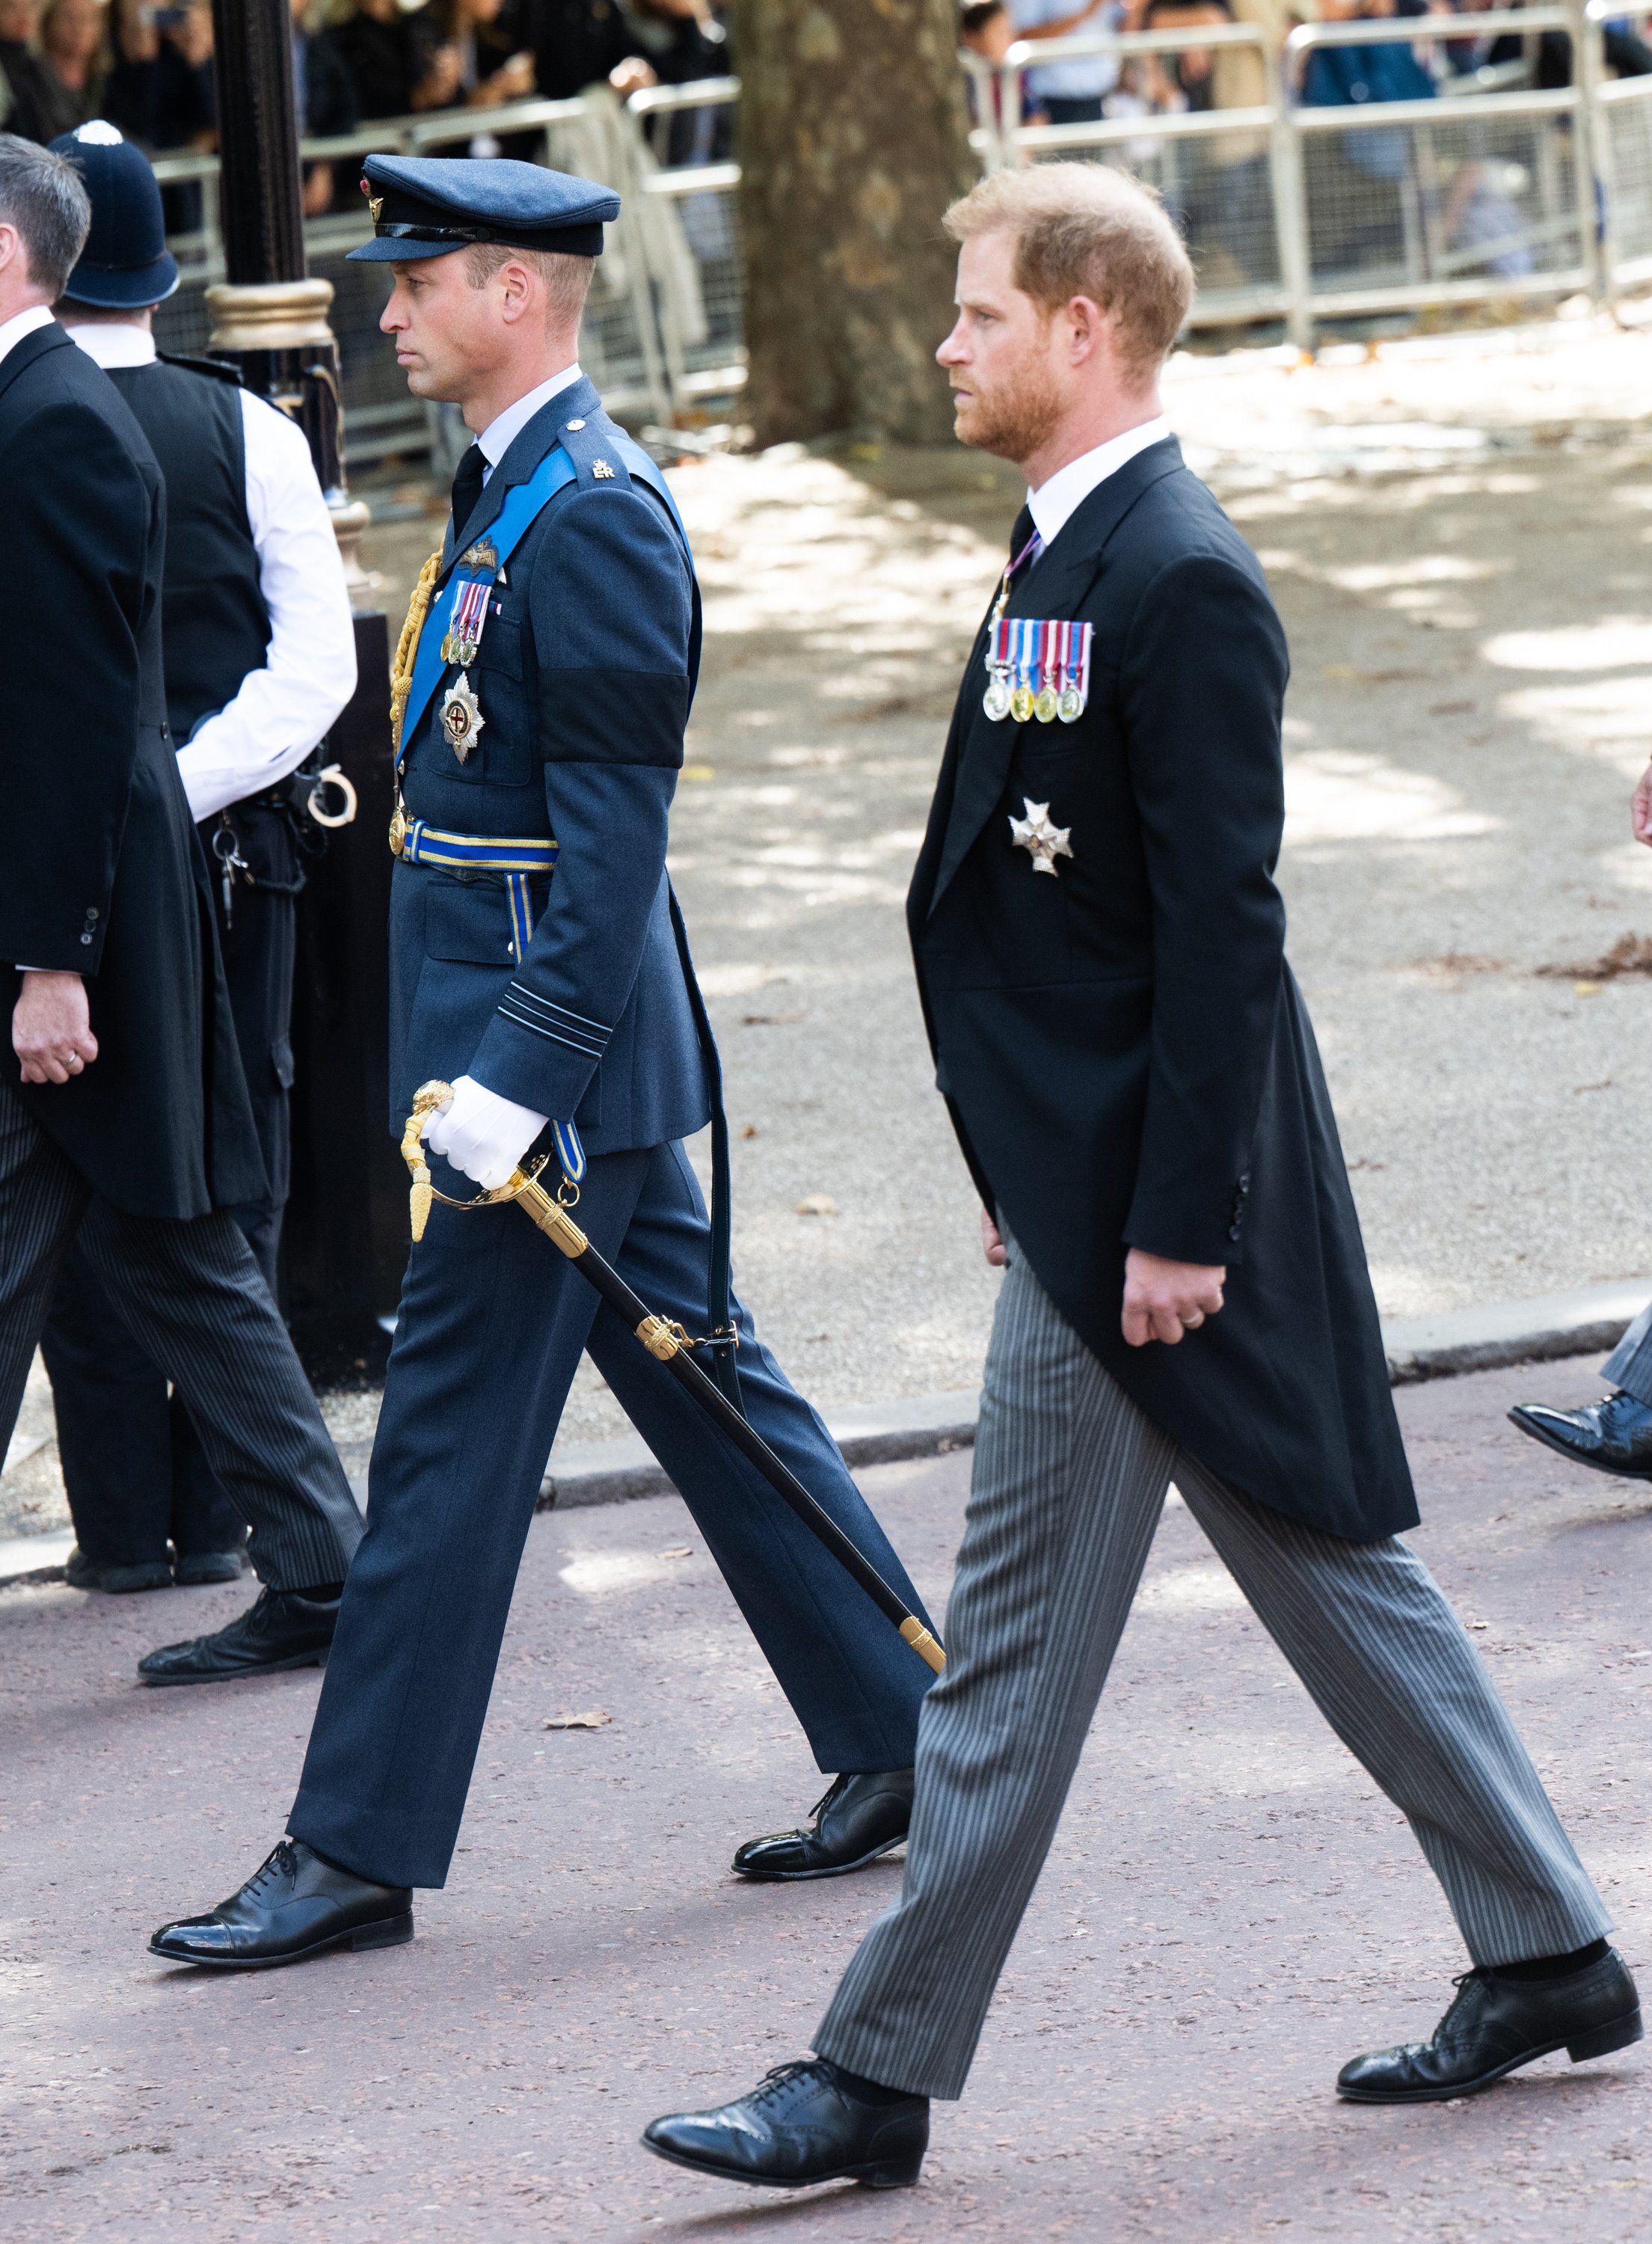 Prince William Prince of Wales and Prince Harry, Duke of Sussex follow the coffin of Queen Elizabeth II on September 19, 2022 in Windsor, England. | Source: Getty Images